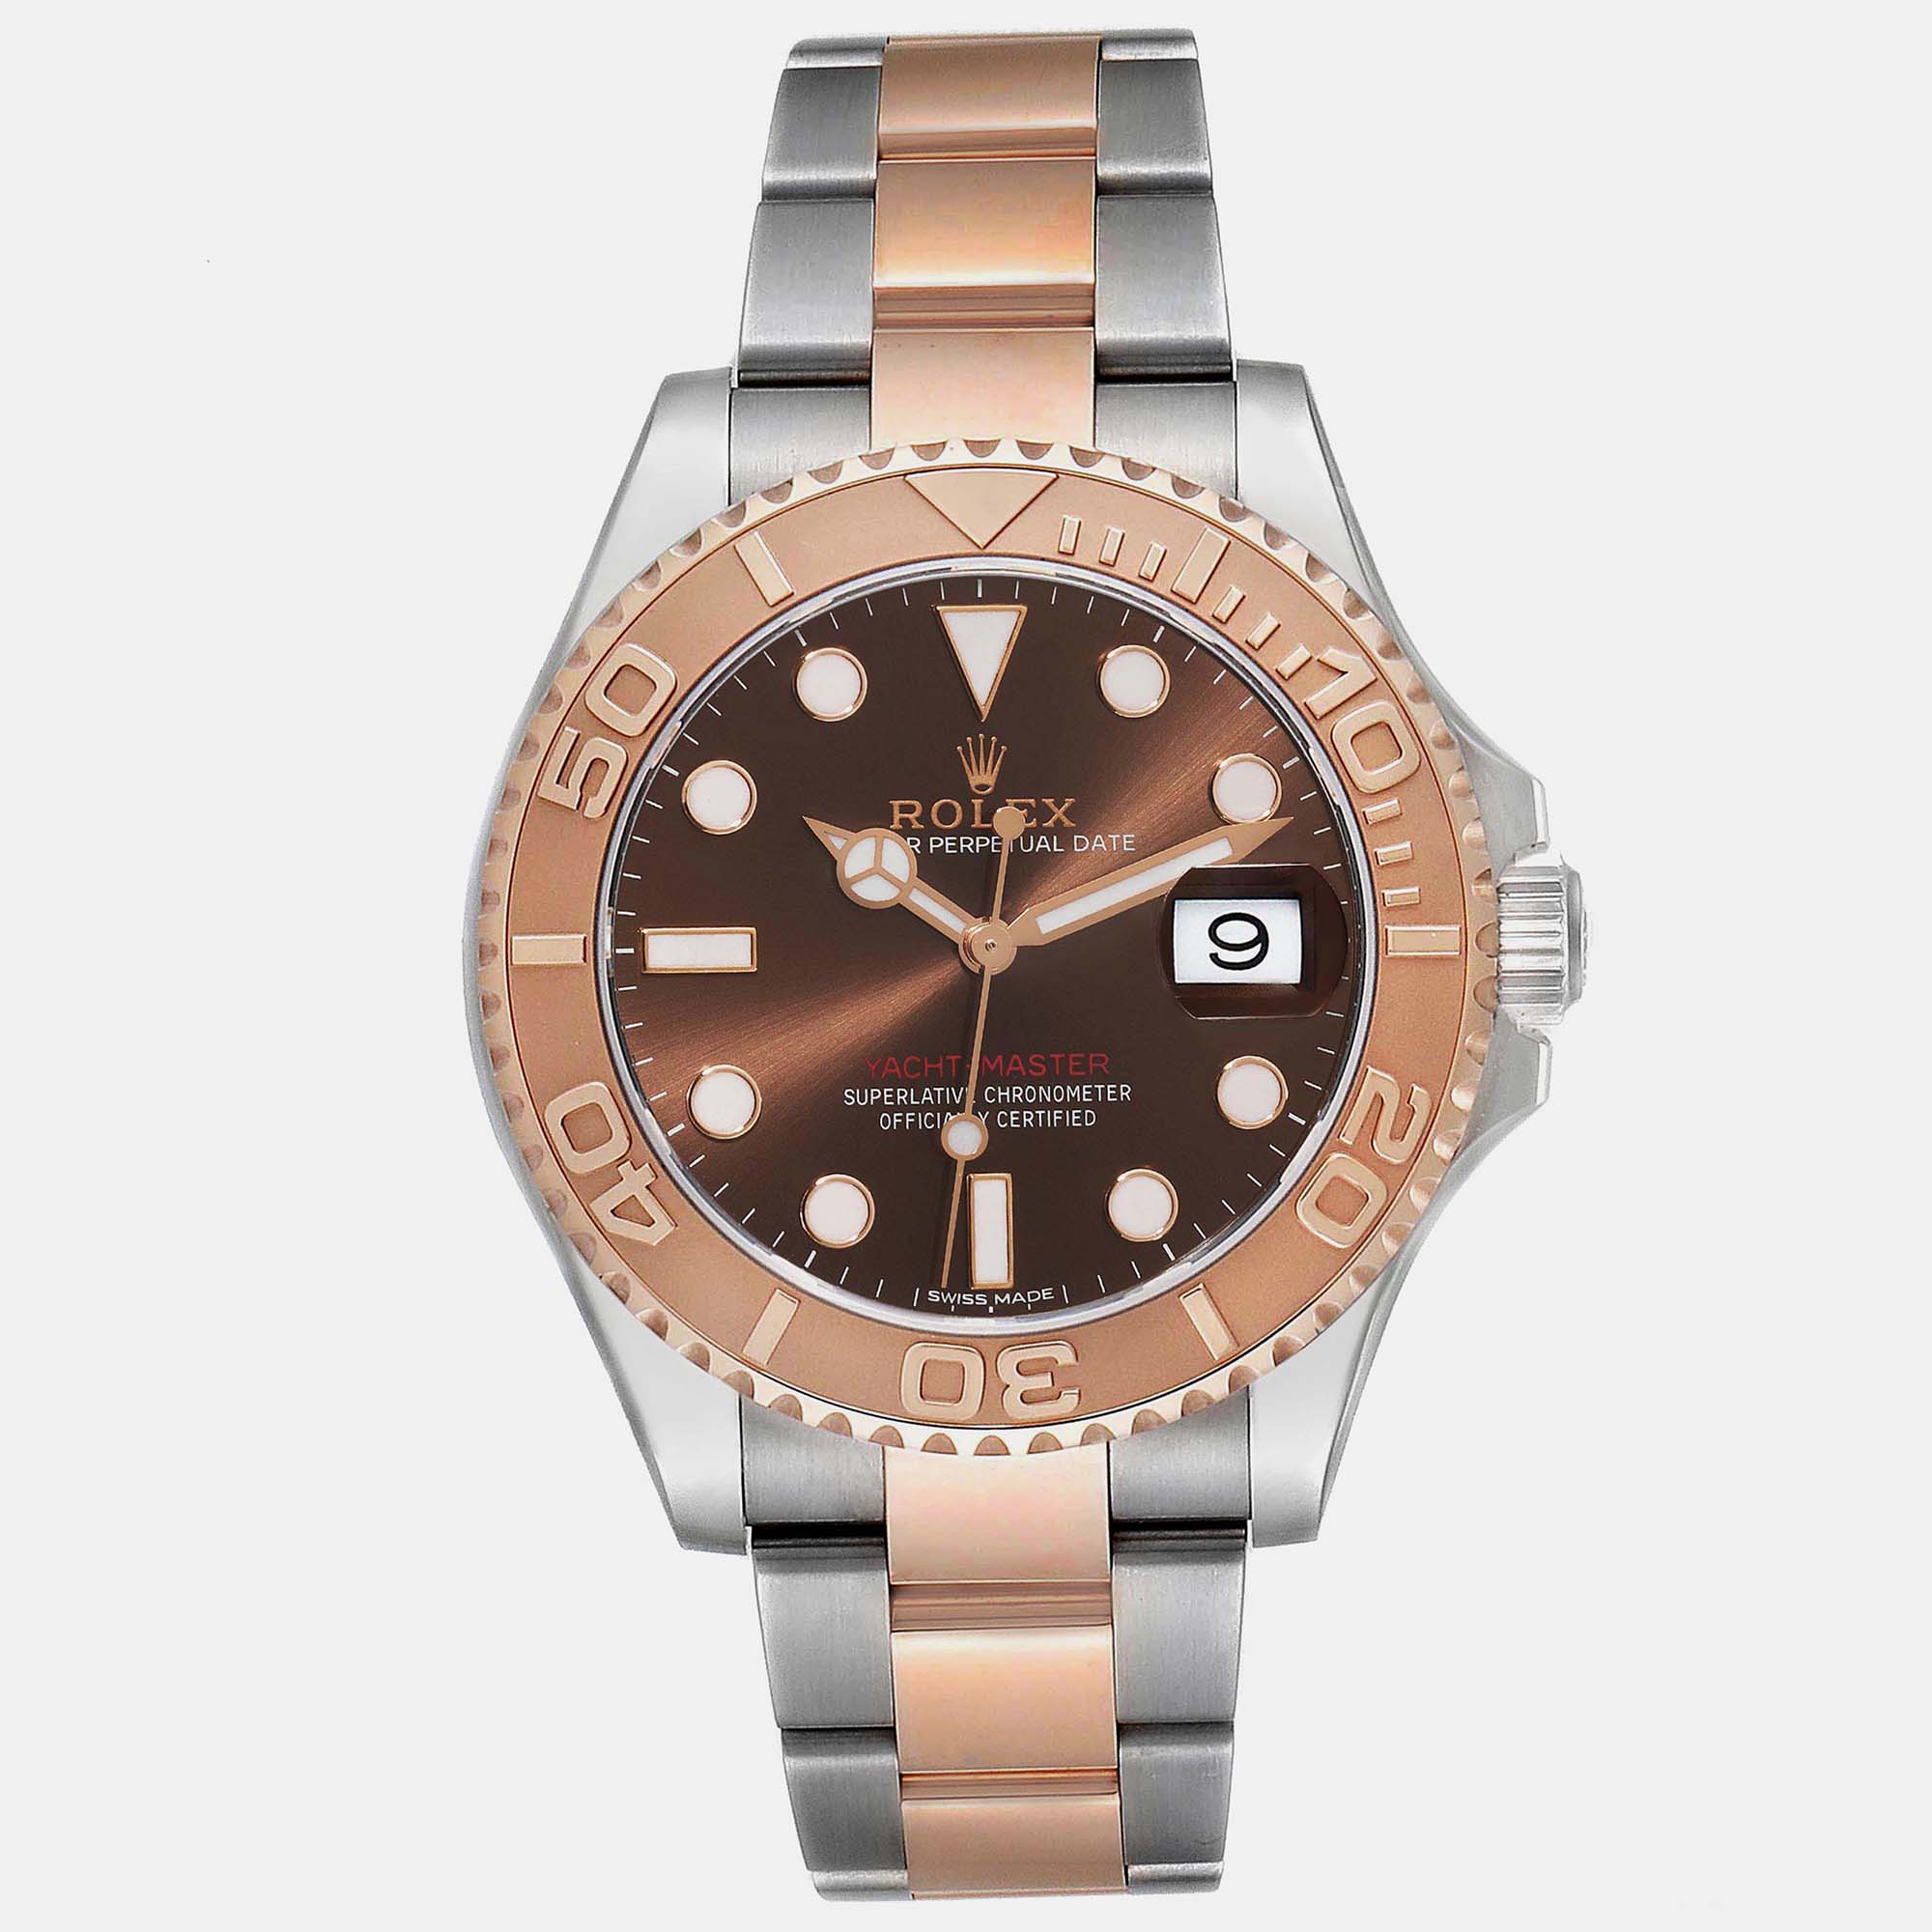 Rolex yachtmaster rose gold steel brown dial men's watch 40 mm